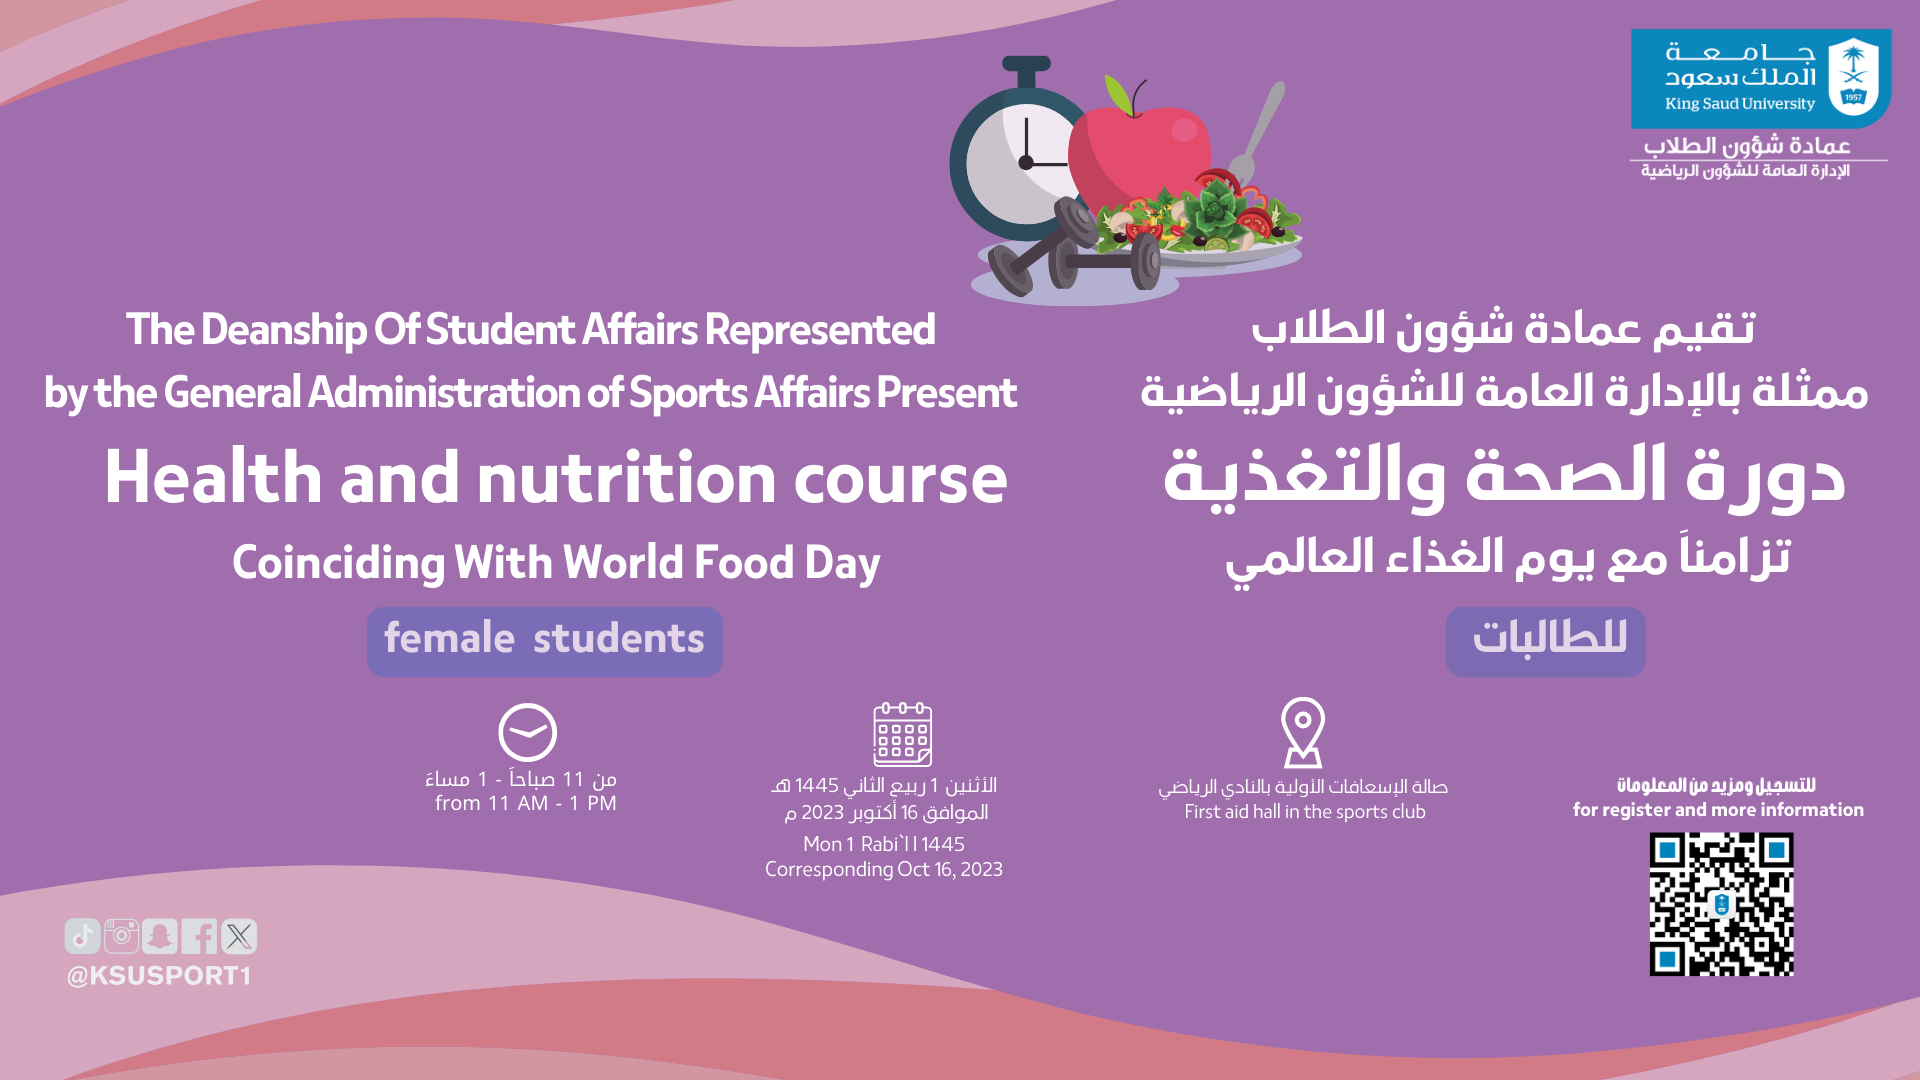 Health and nutrition course coinciding With world food day female students